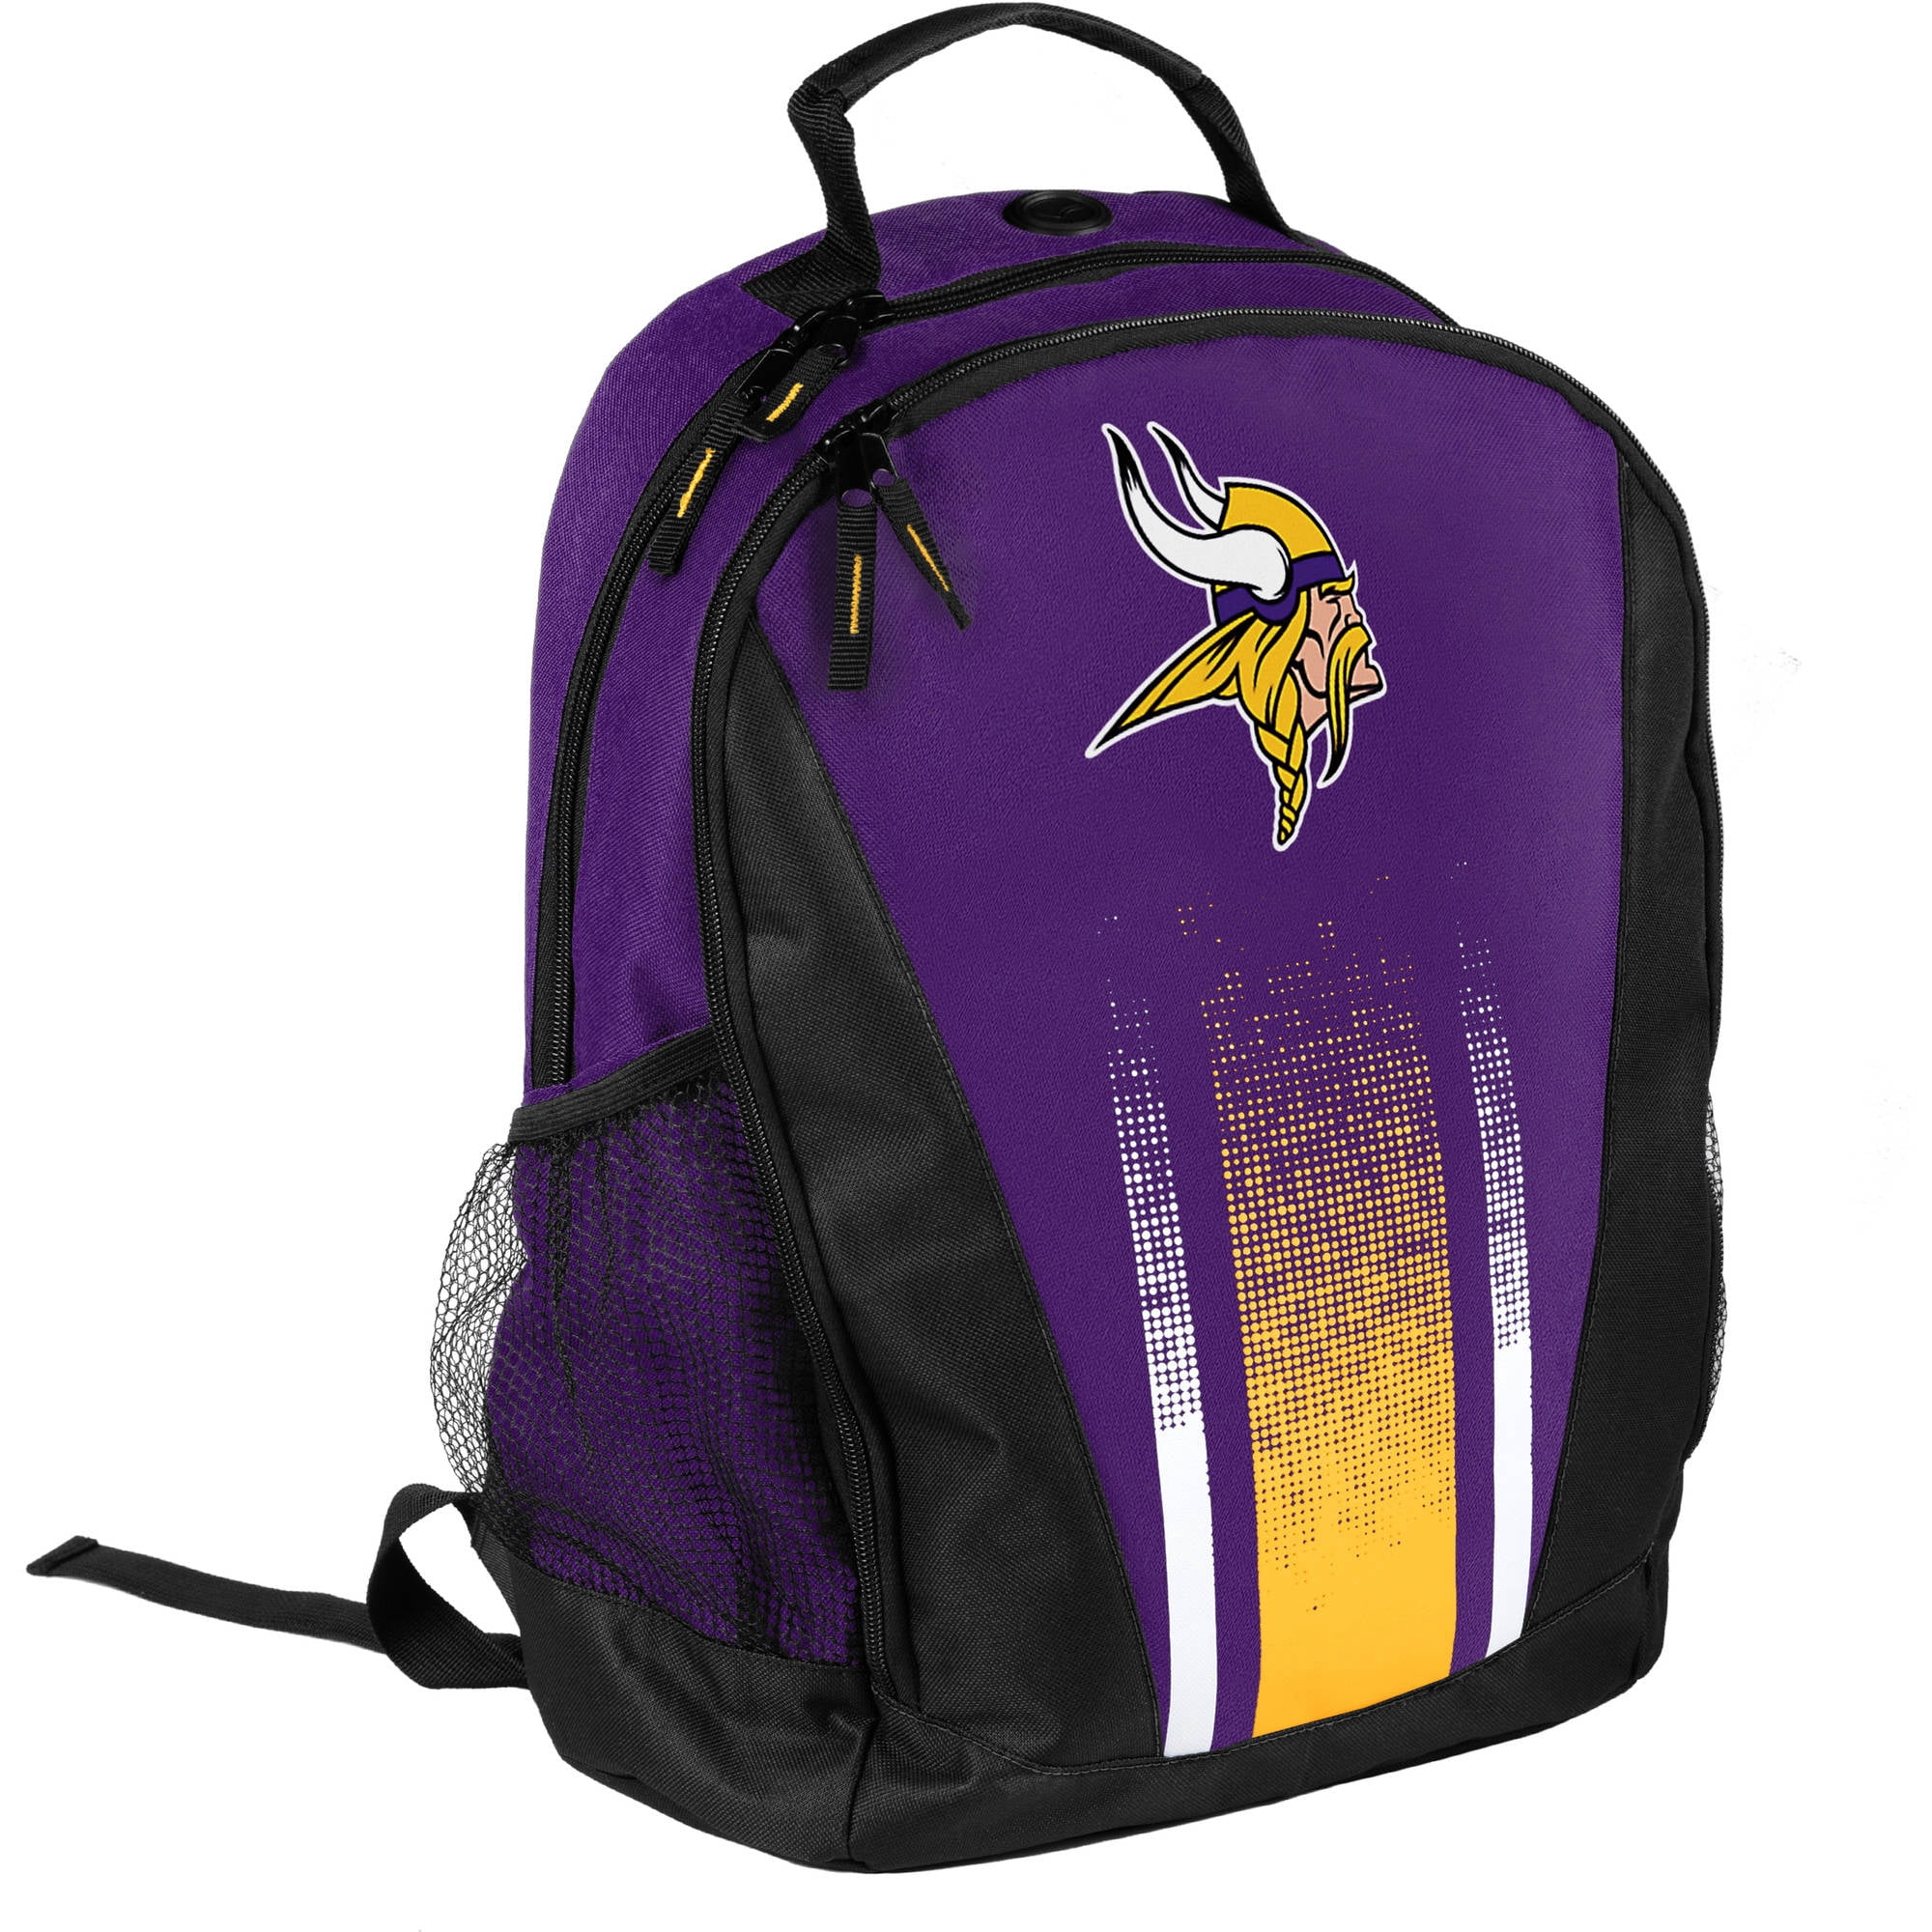 Forever Collectibles NFL Minnesota Vikings Prime Backpack 